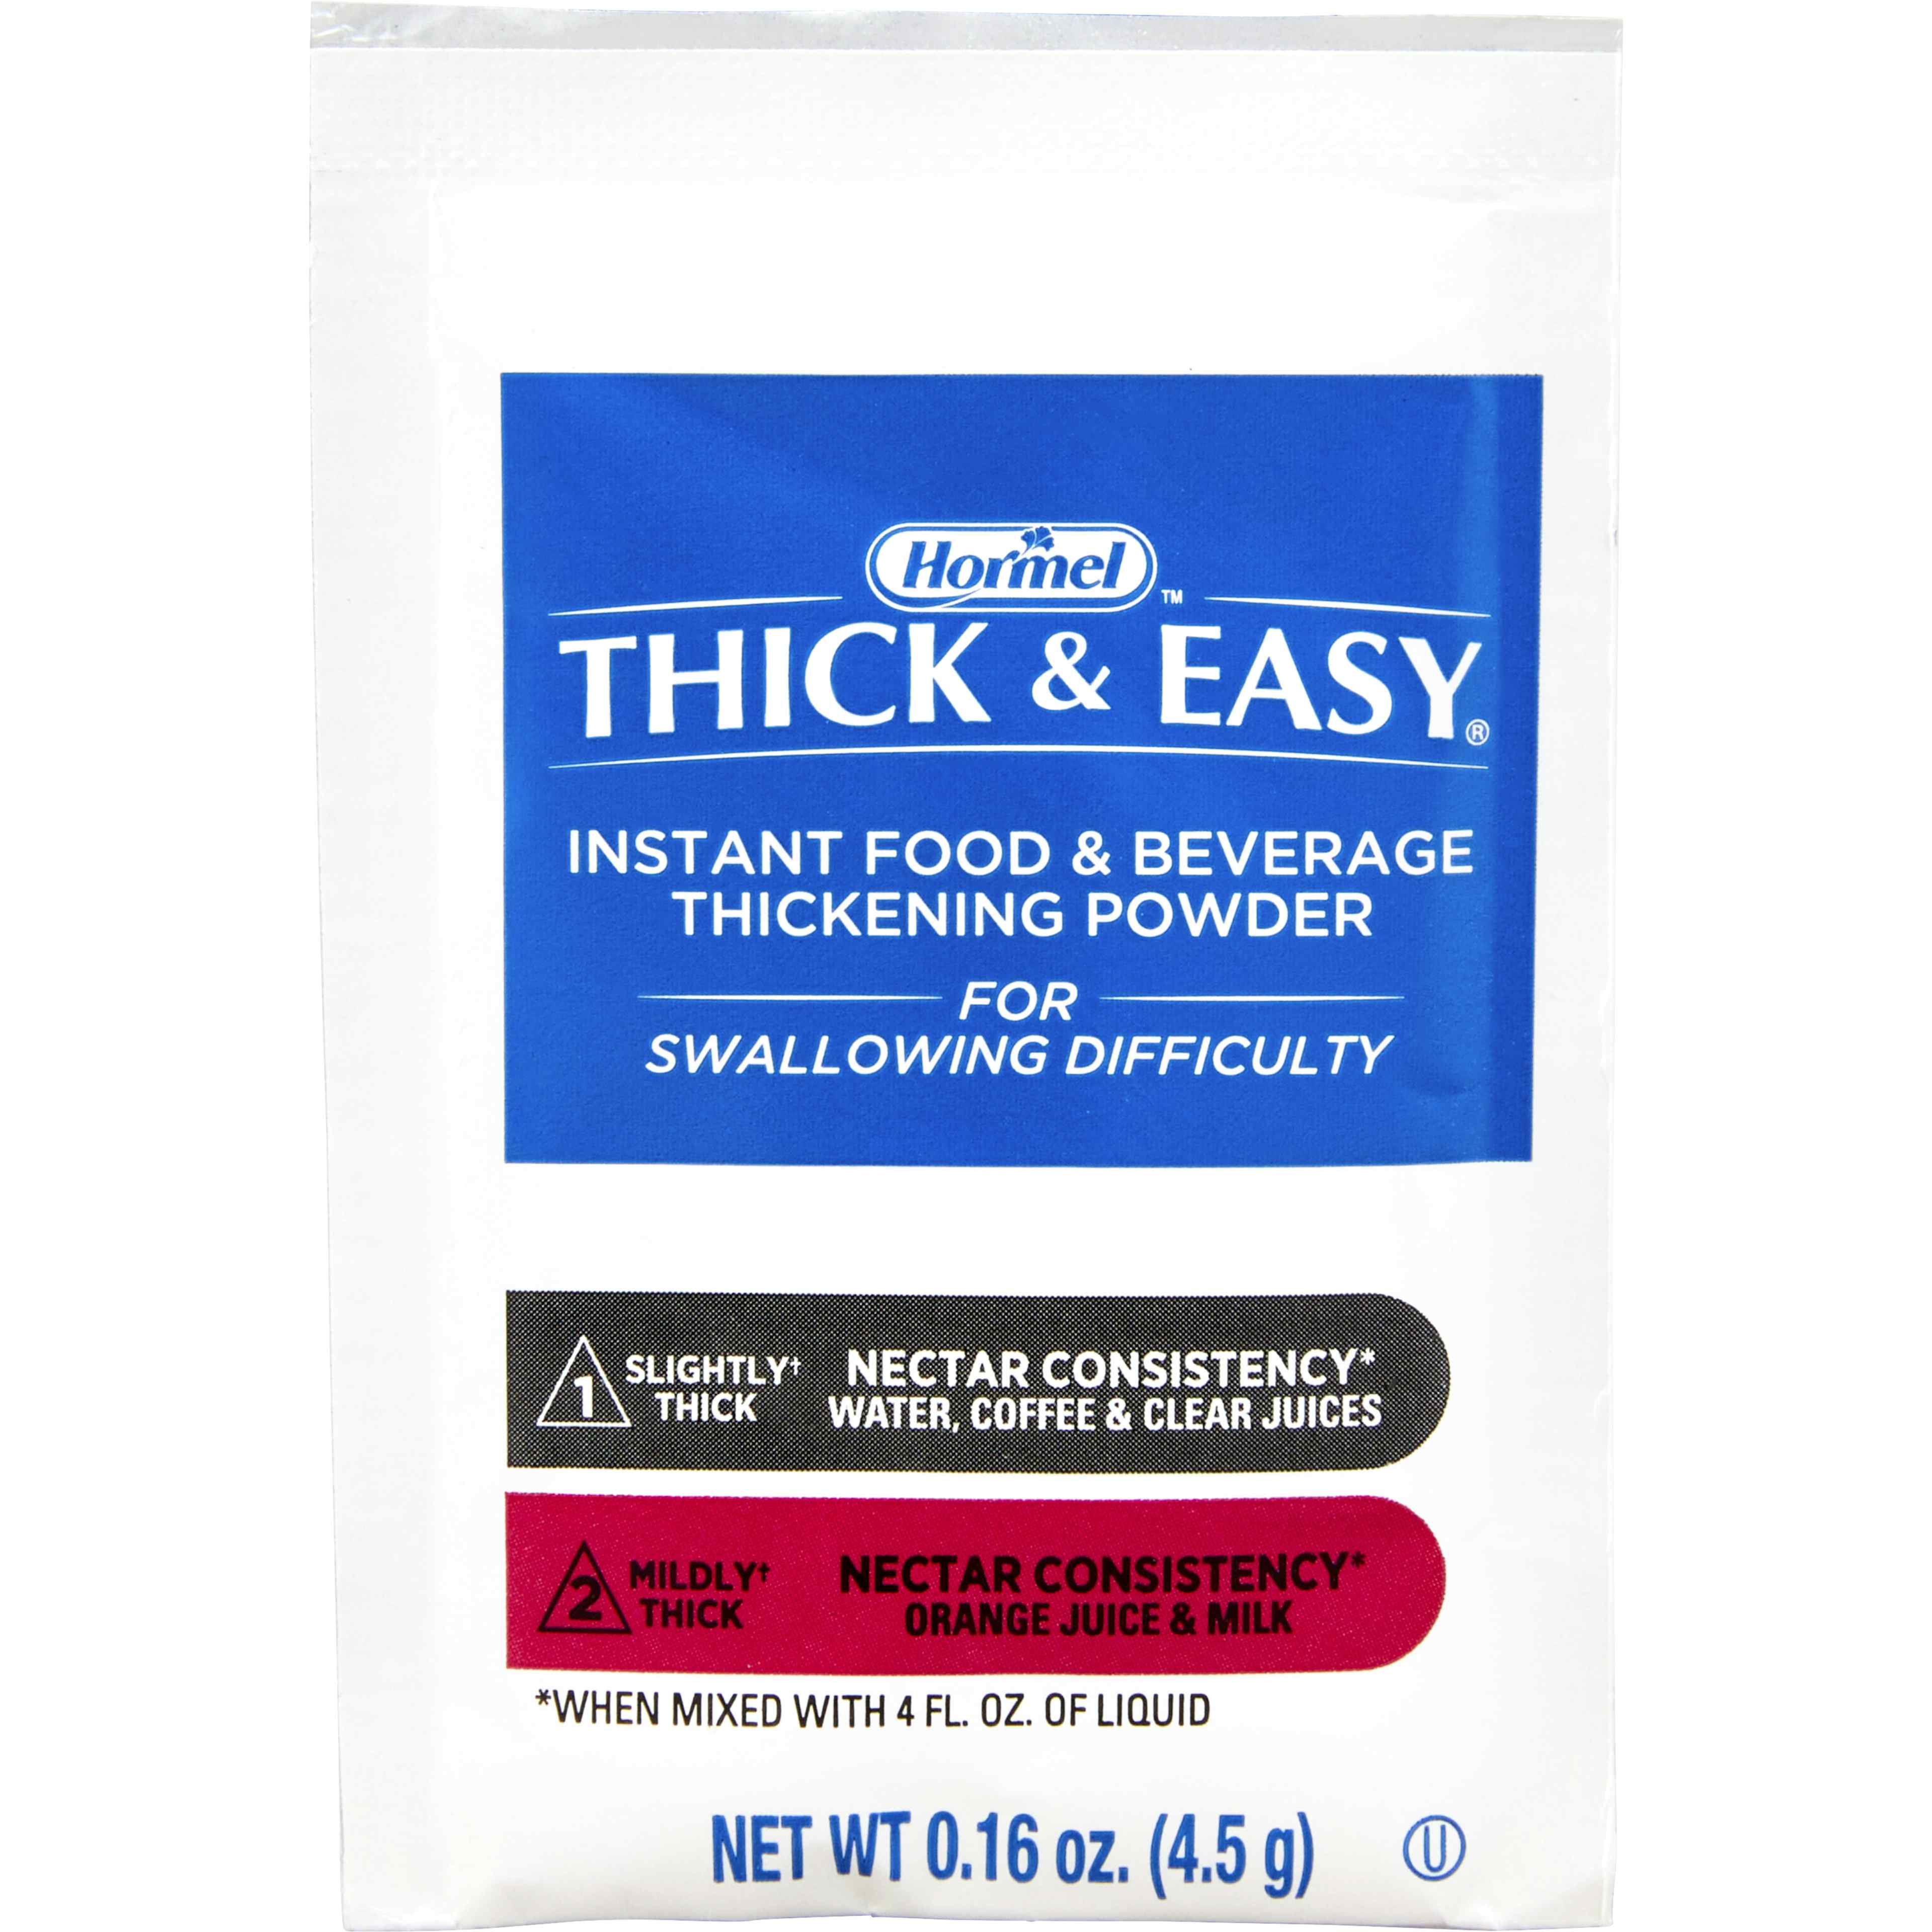 Thick & Easy Instant Food & Beverage Thickening Powder